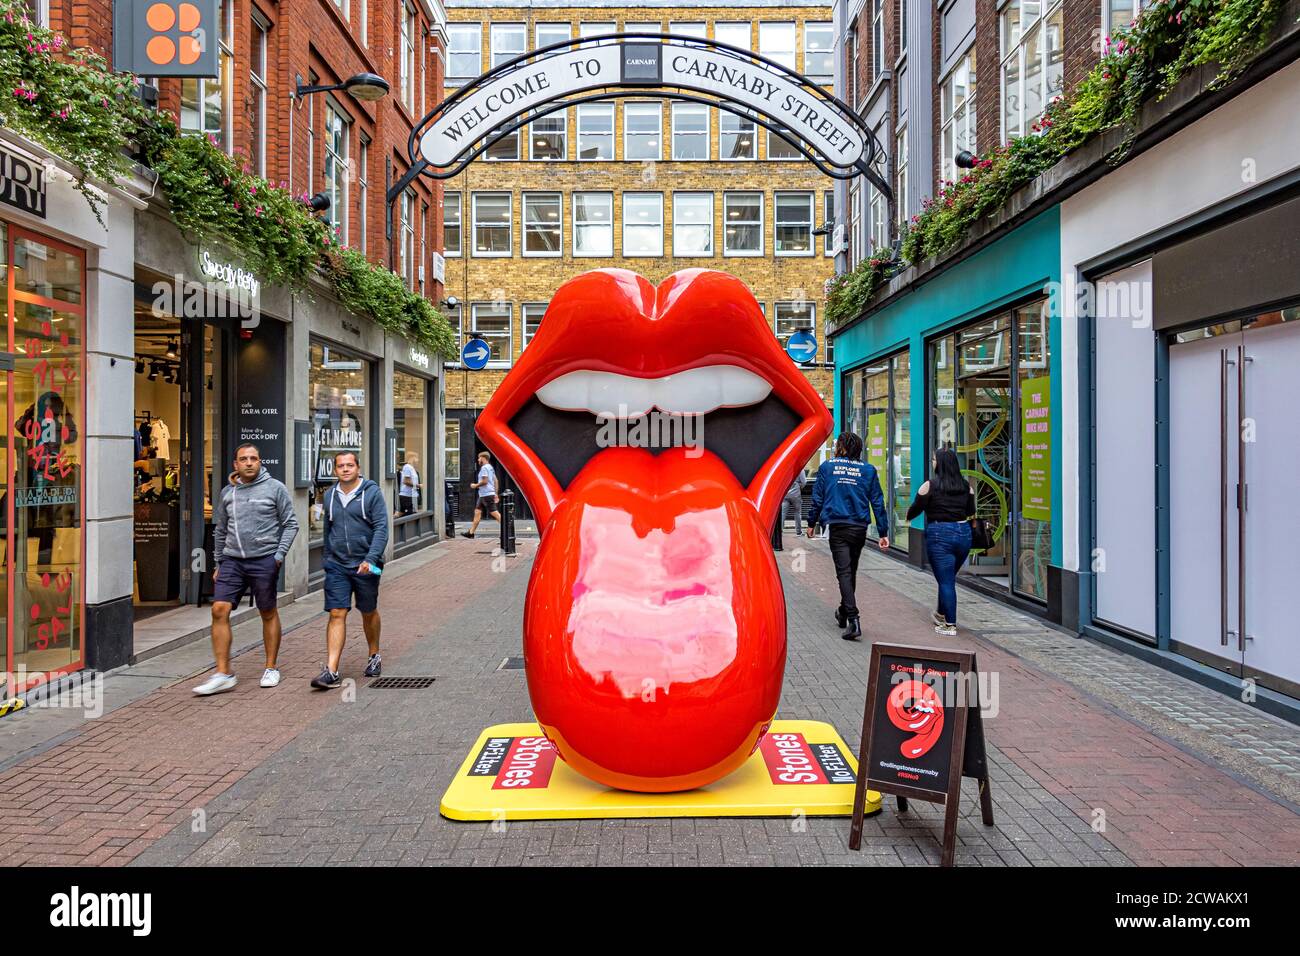 Rolling Stones tongue and lips logo in Carnaby Street, London where the worlds first Rolling Stones retail store, RS No. 9 Carnaby, has opened, London Stock Photo